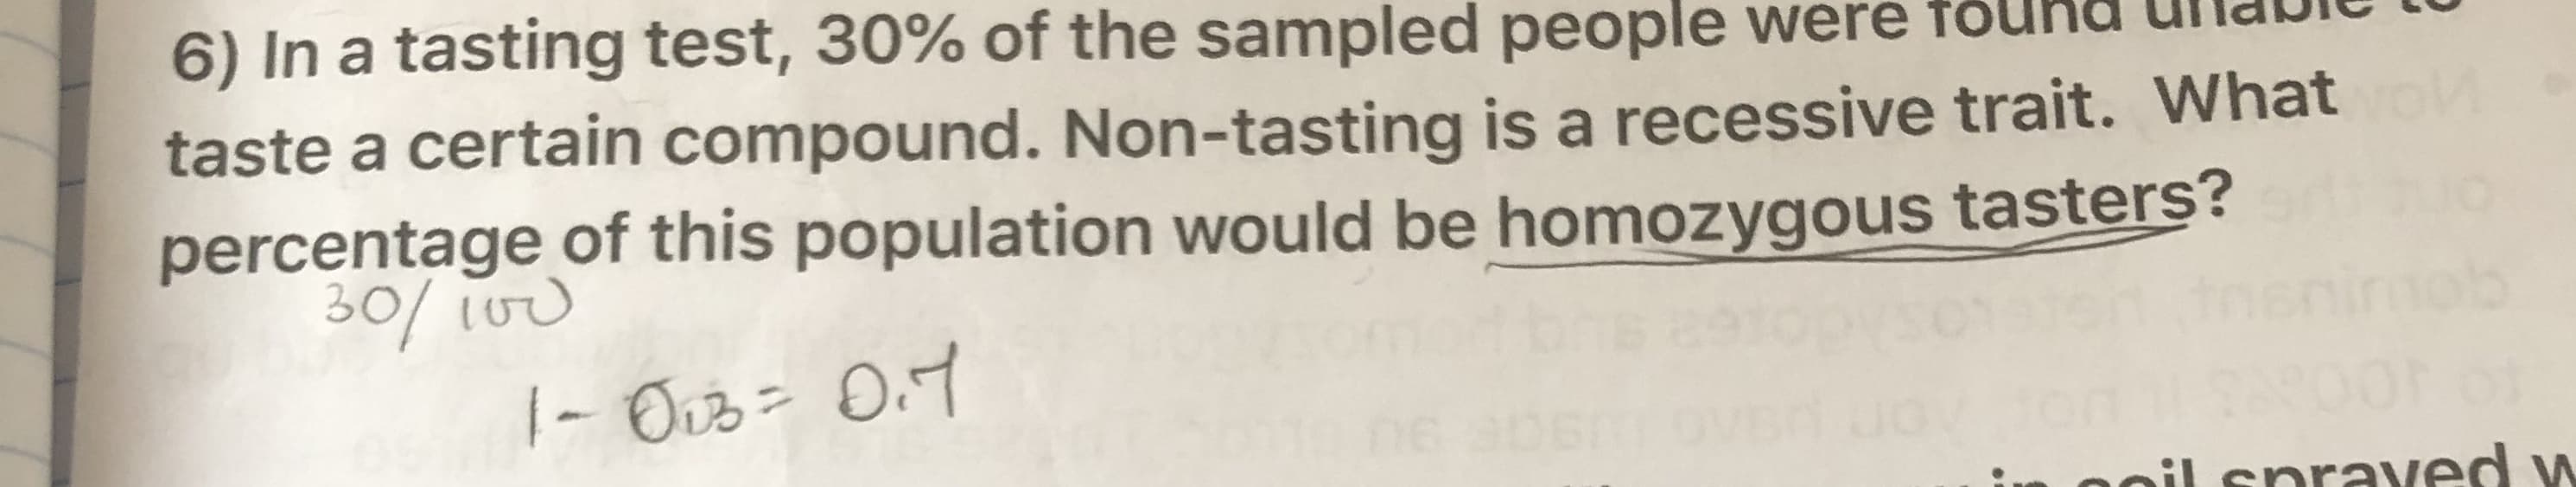 percentage of this population would be homozygous tasters?
